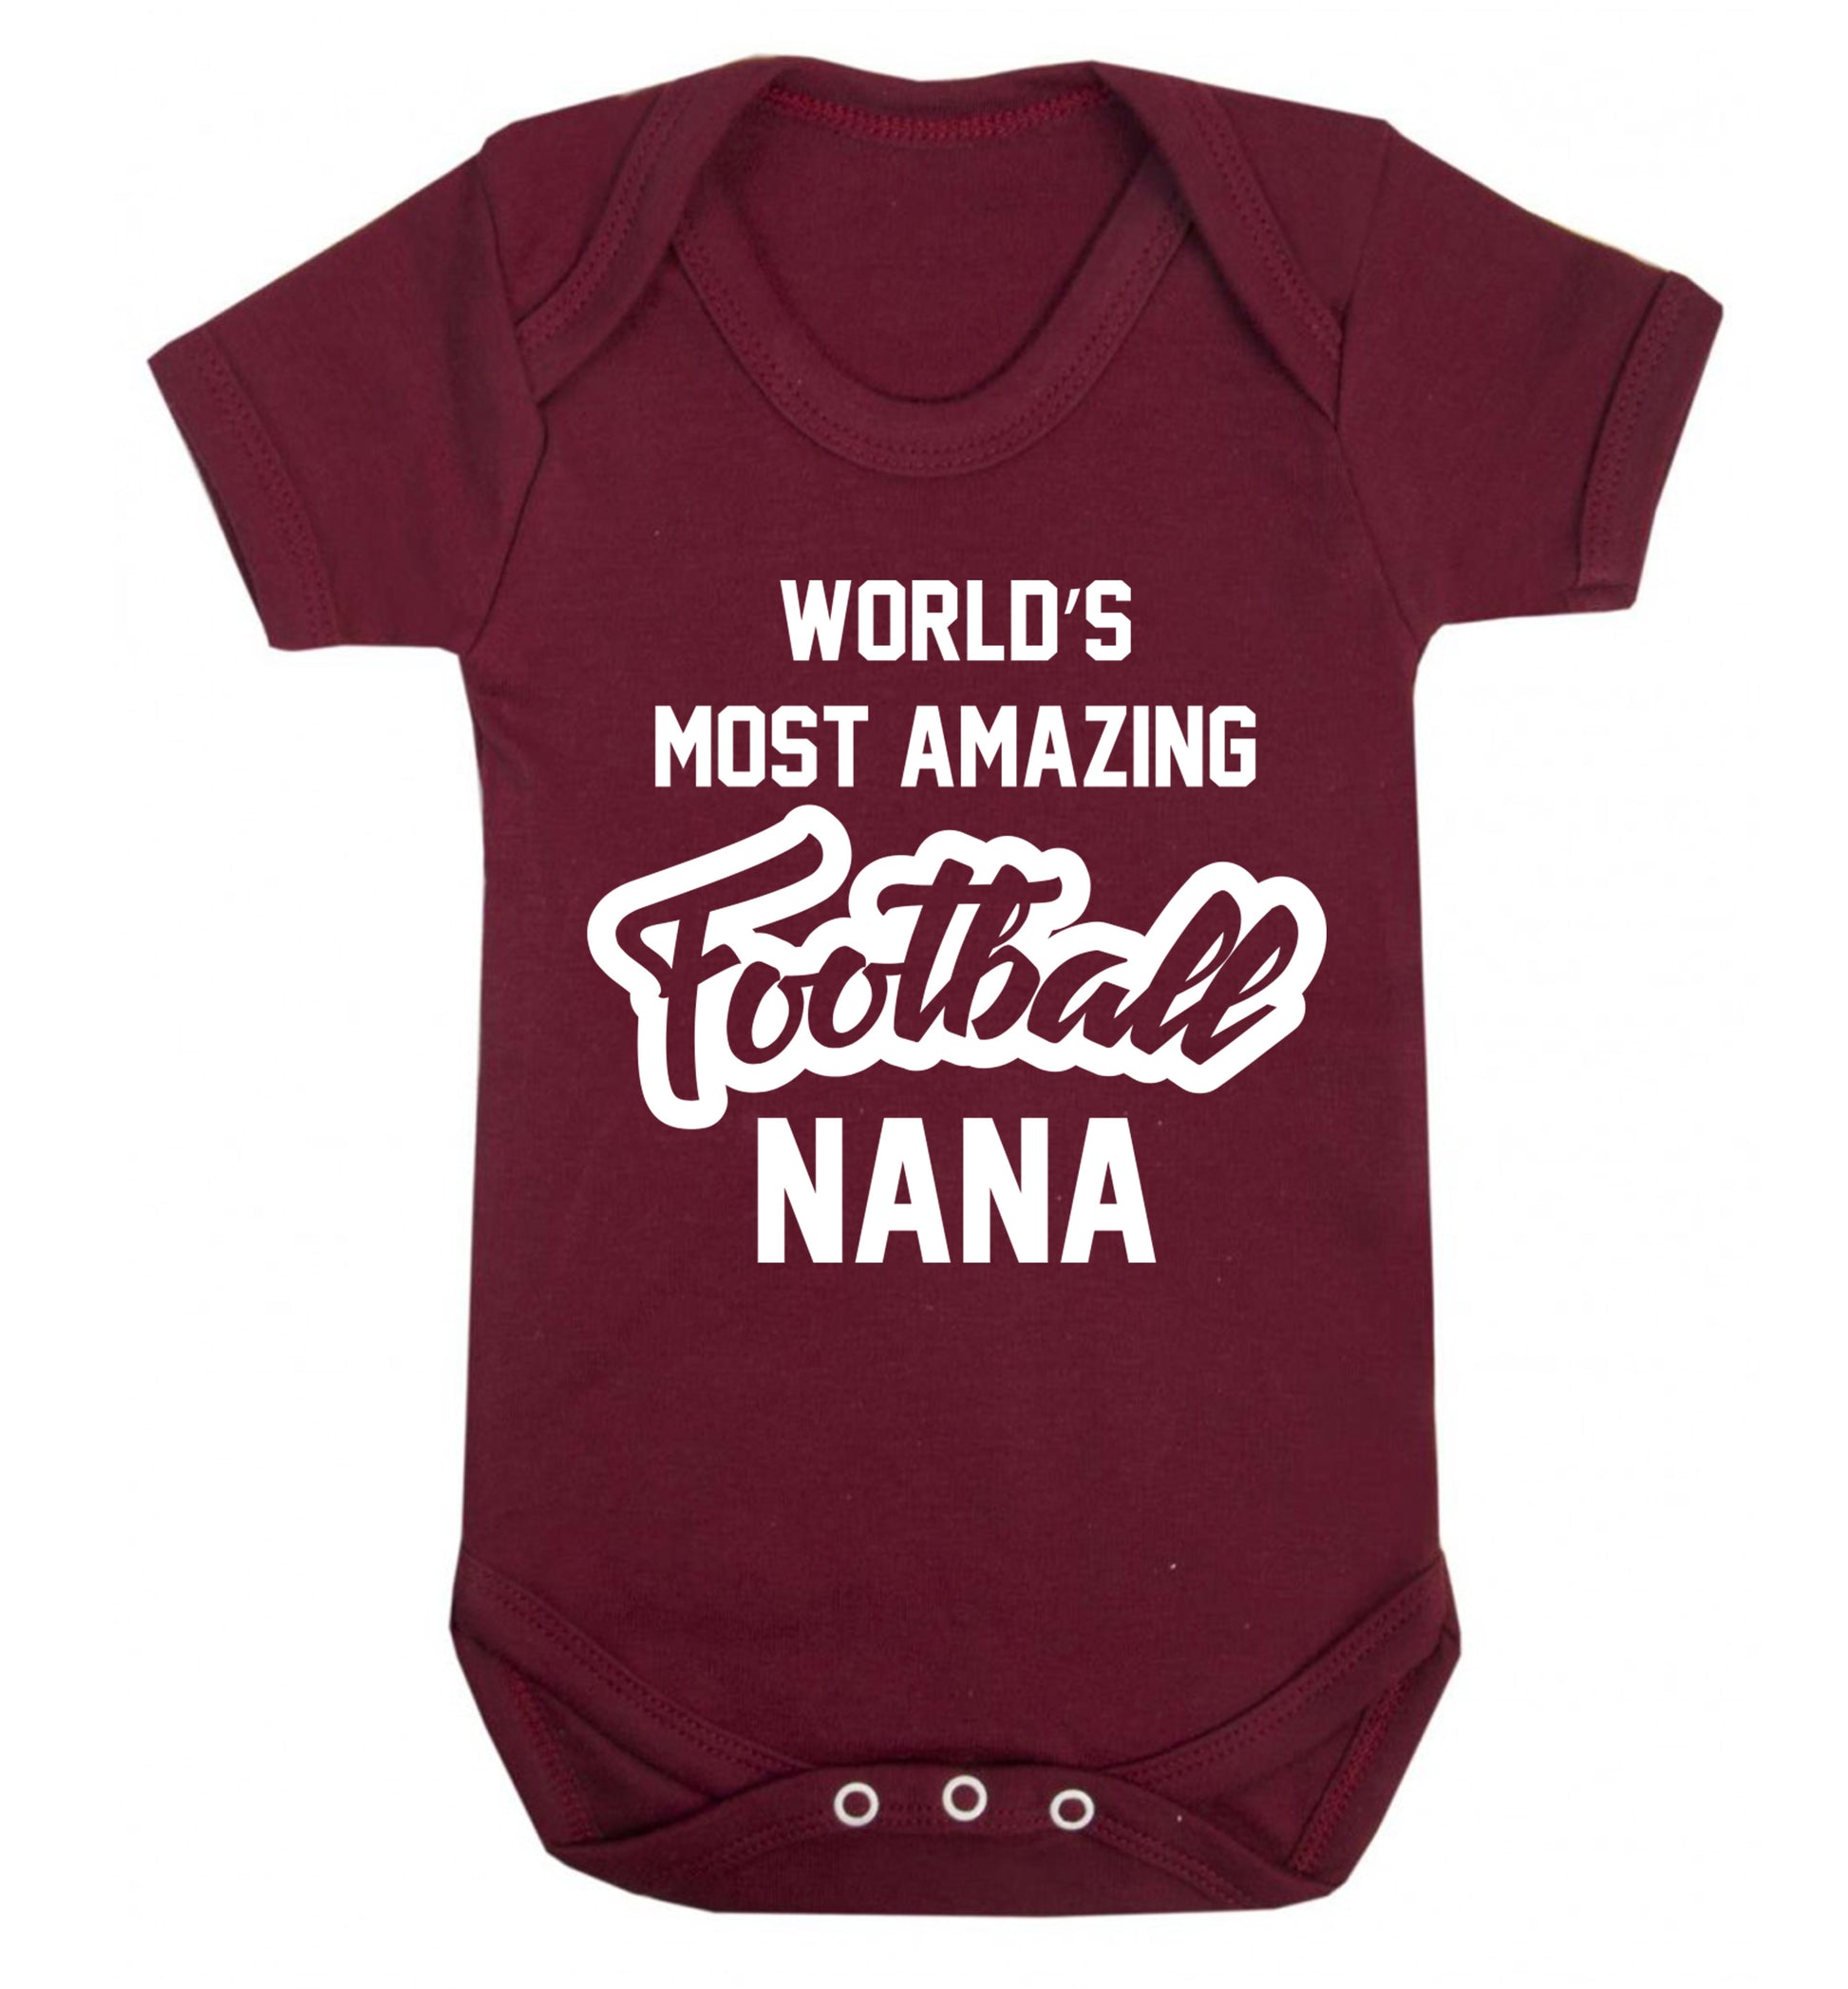 Worlds most amazing football nana Baby Vest maroon 18-24 months